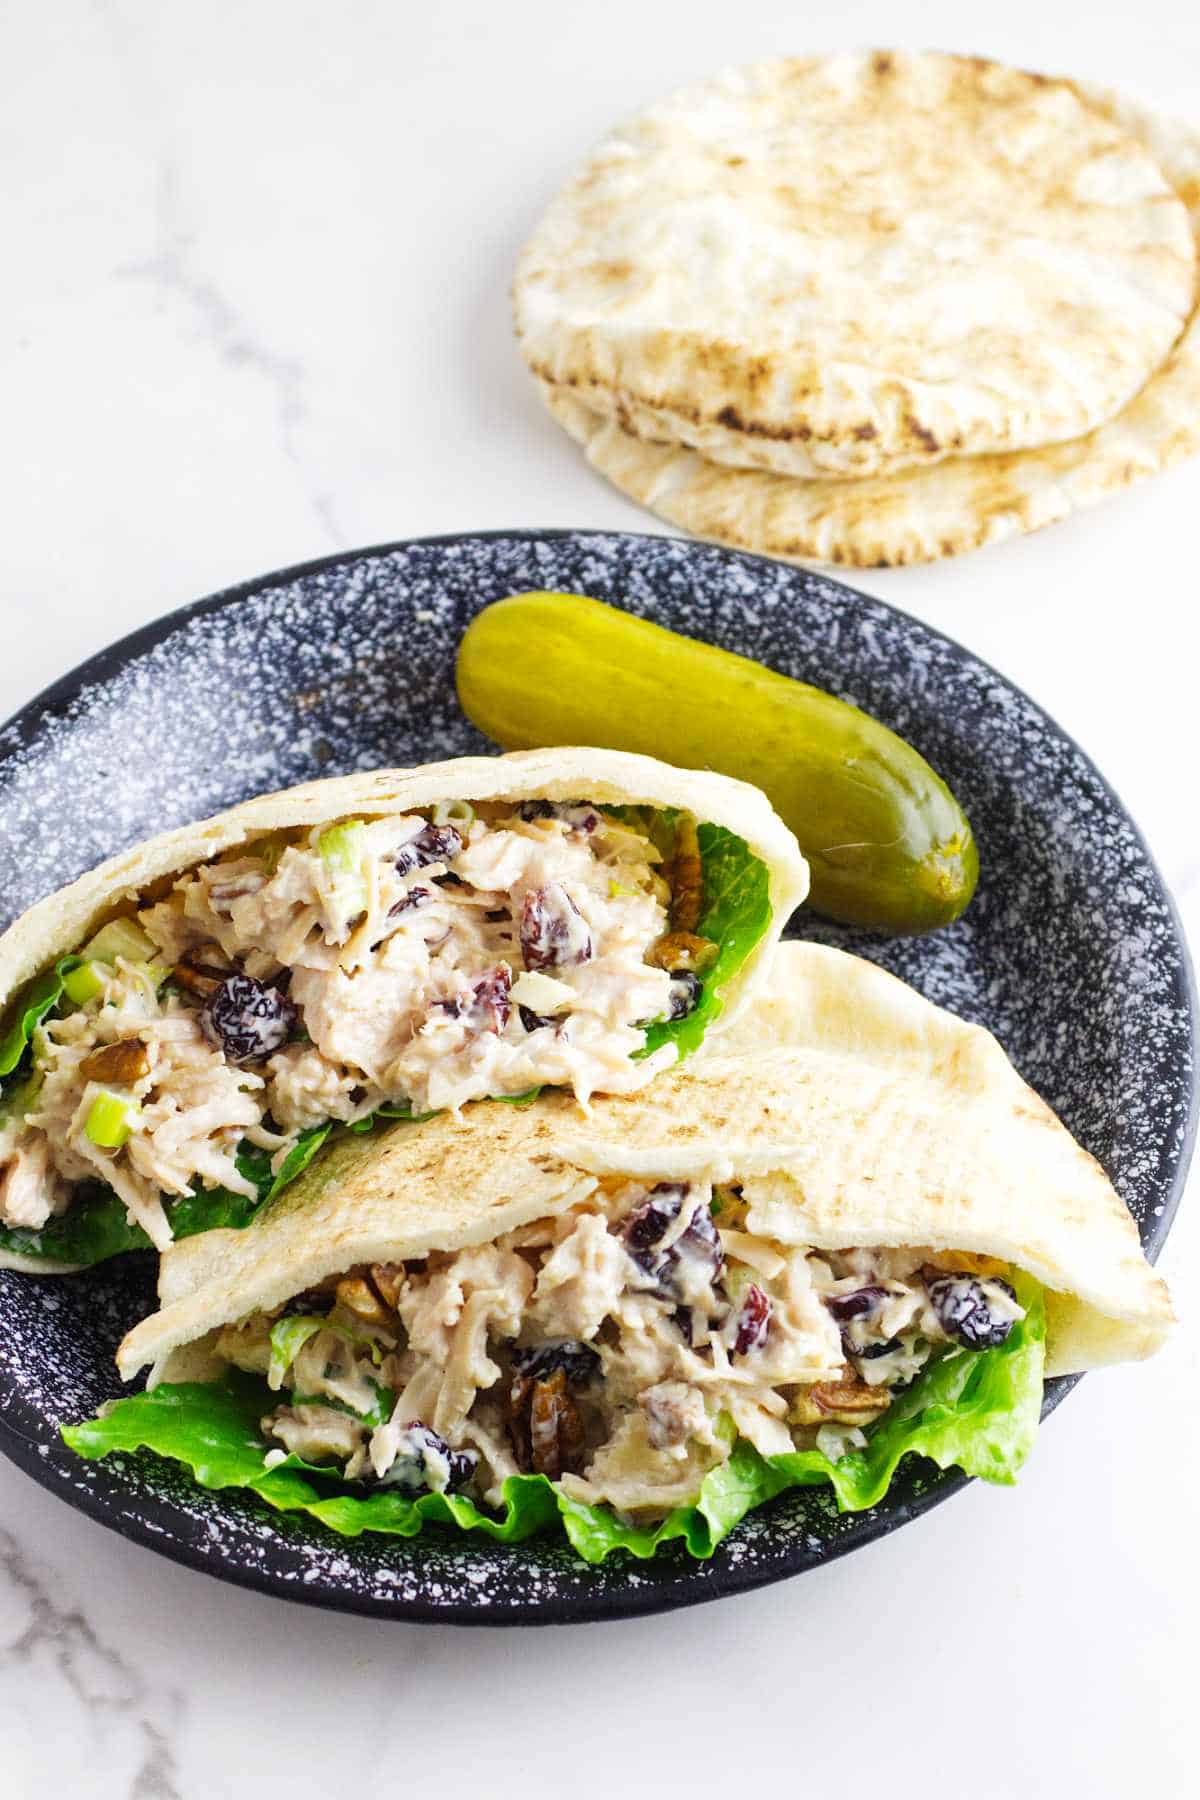 cranberry pecan chicken salad in pita pockets on a plate with a dill pickle - oktoberfest dinner recipes.